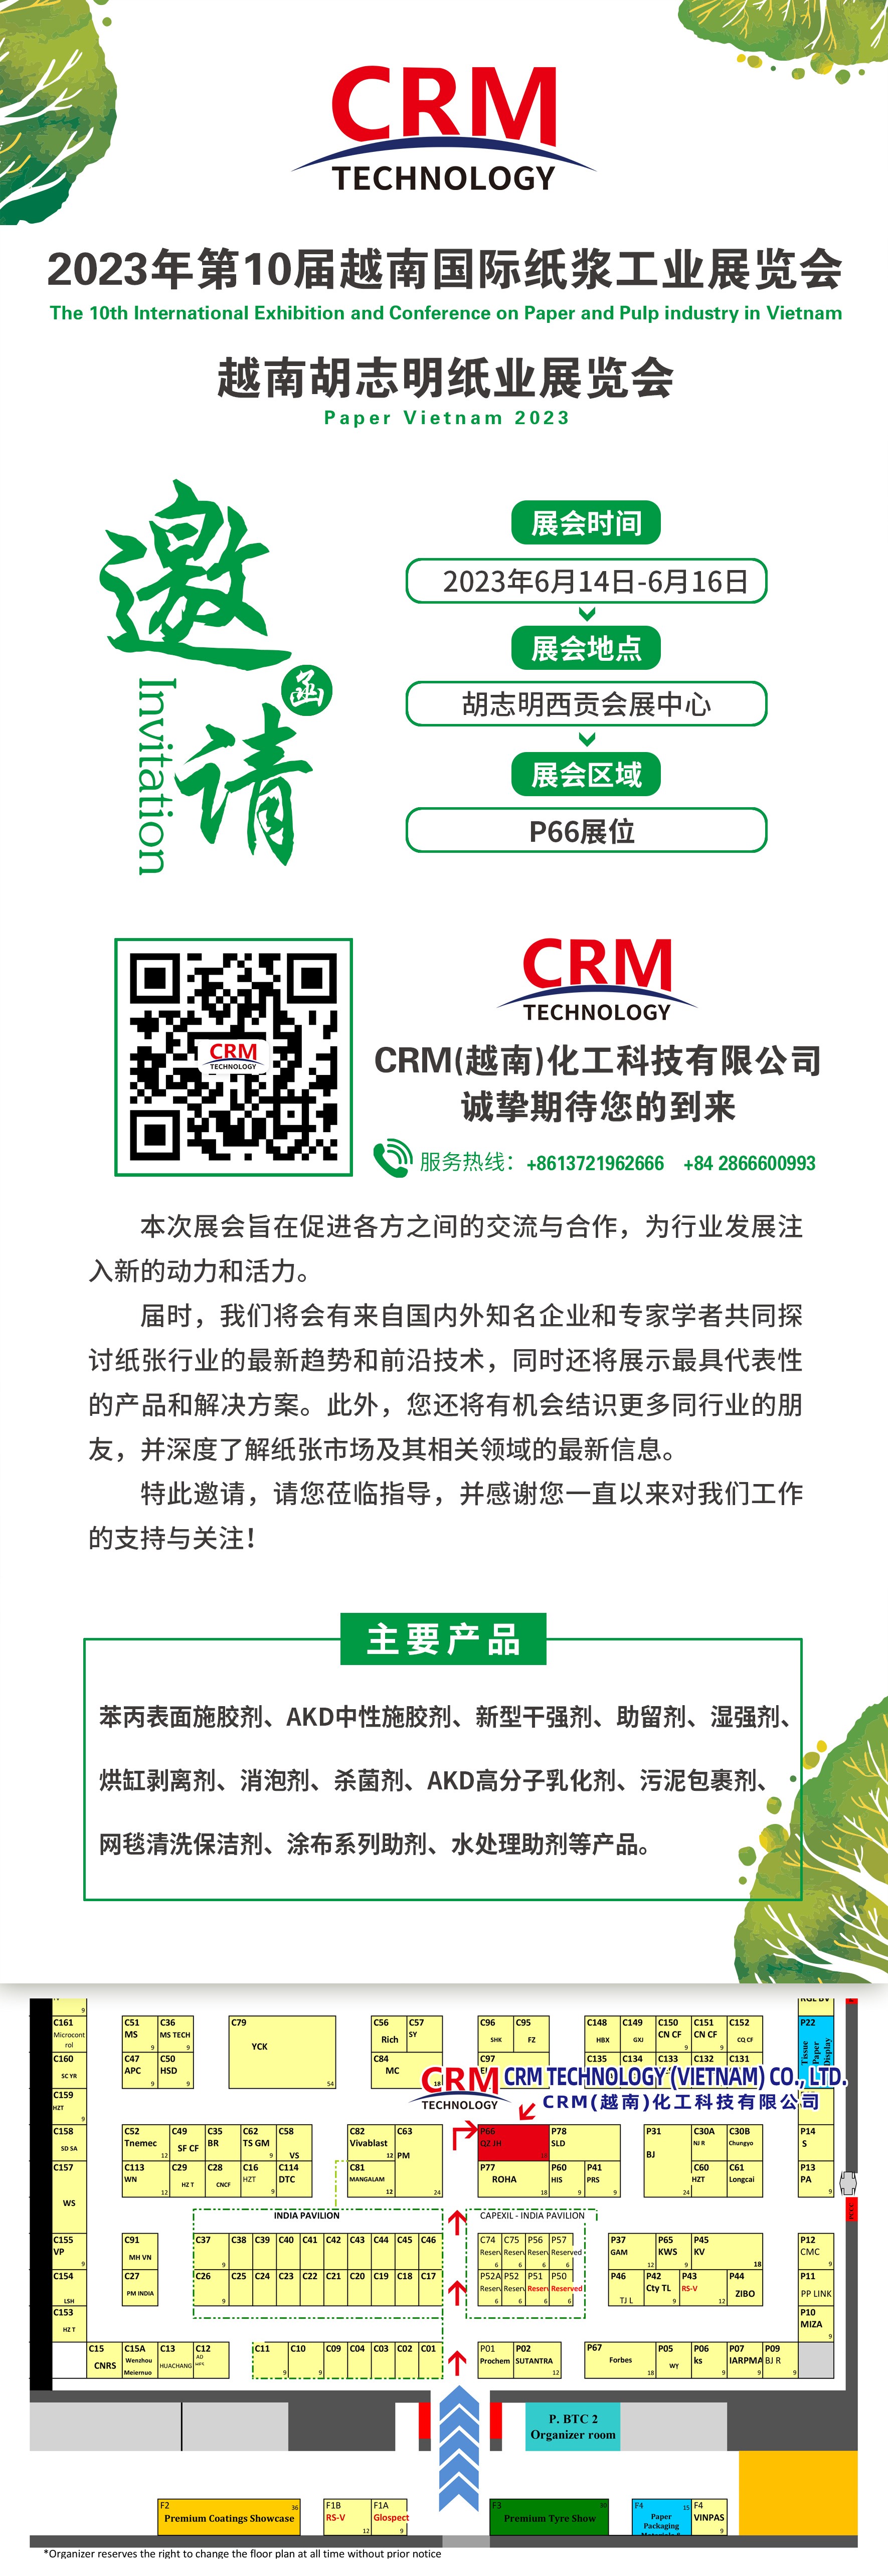 CRM (Vietnam) Chemical Technology Co., Ltd. invites you to visit Vietnam Ho Chi Minh International Paper Exhibition from June 14 to June 16, 2023, and meet you at Booth P66, Saigon Convention and Exhibition Center, Ho Chi Minh, sincerely looking forw